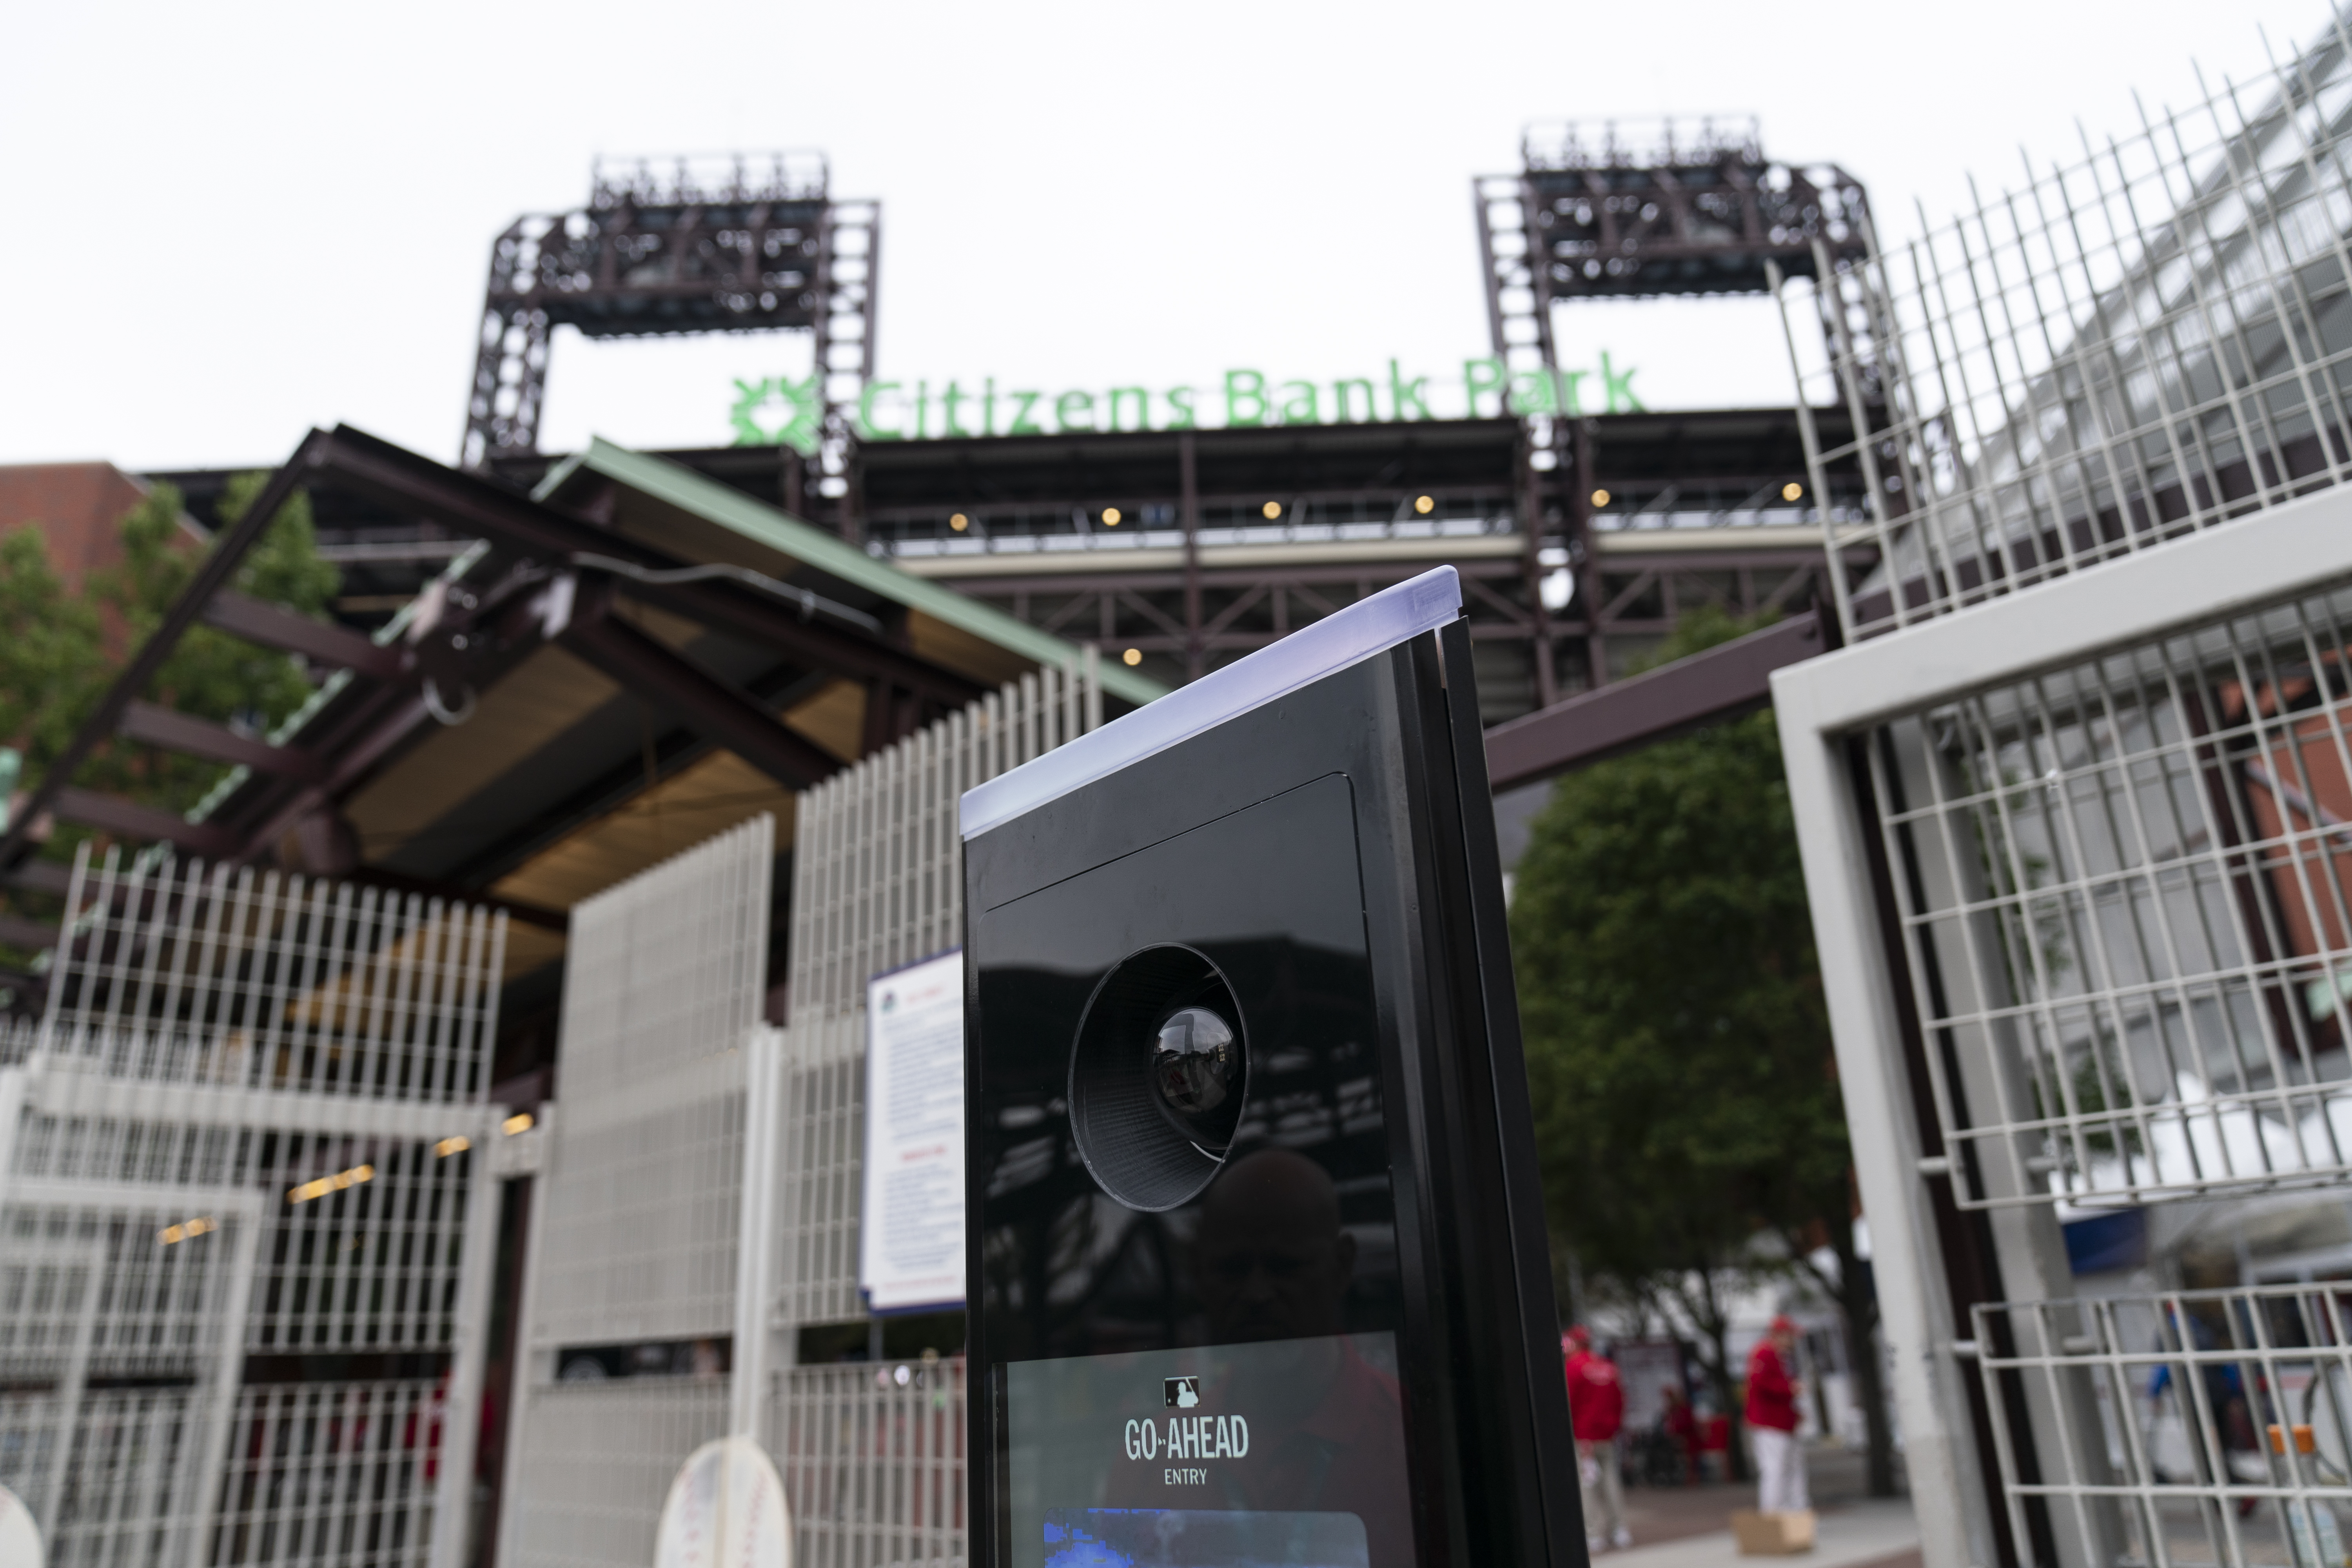 A facial scan camera is seen at Citizens Bank Park ahead of a baseball game between the Philadelphia Phillies and the Pittsburgh Pirates, Thursday, Sept. 28, 2023, in Philadelphia. (AP Photo/Matt Rourke)